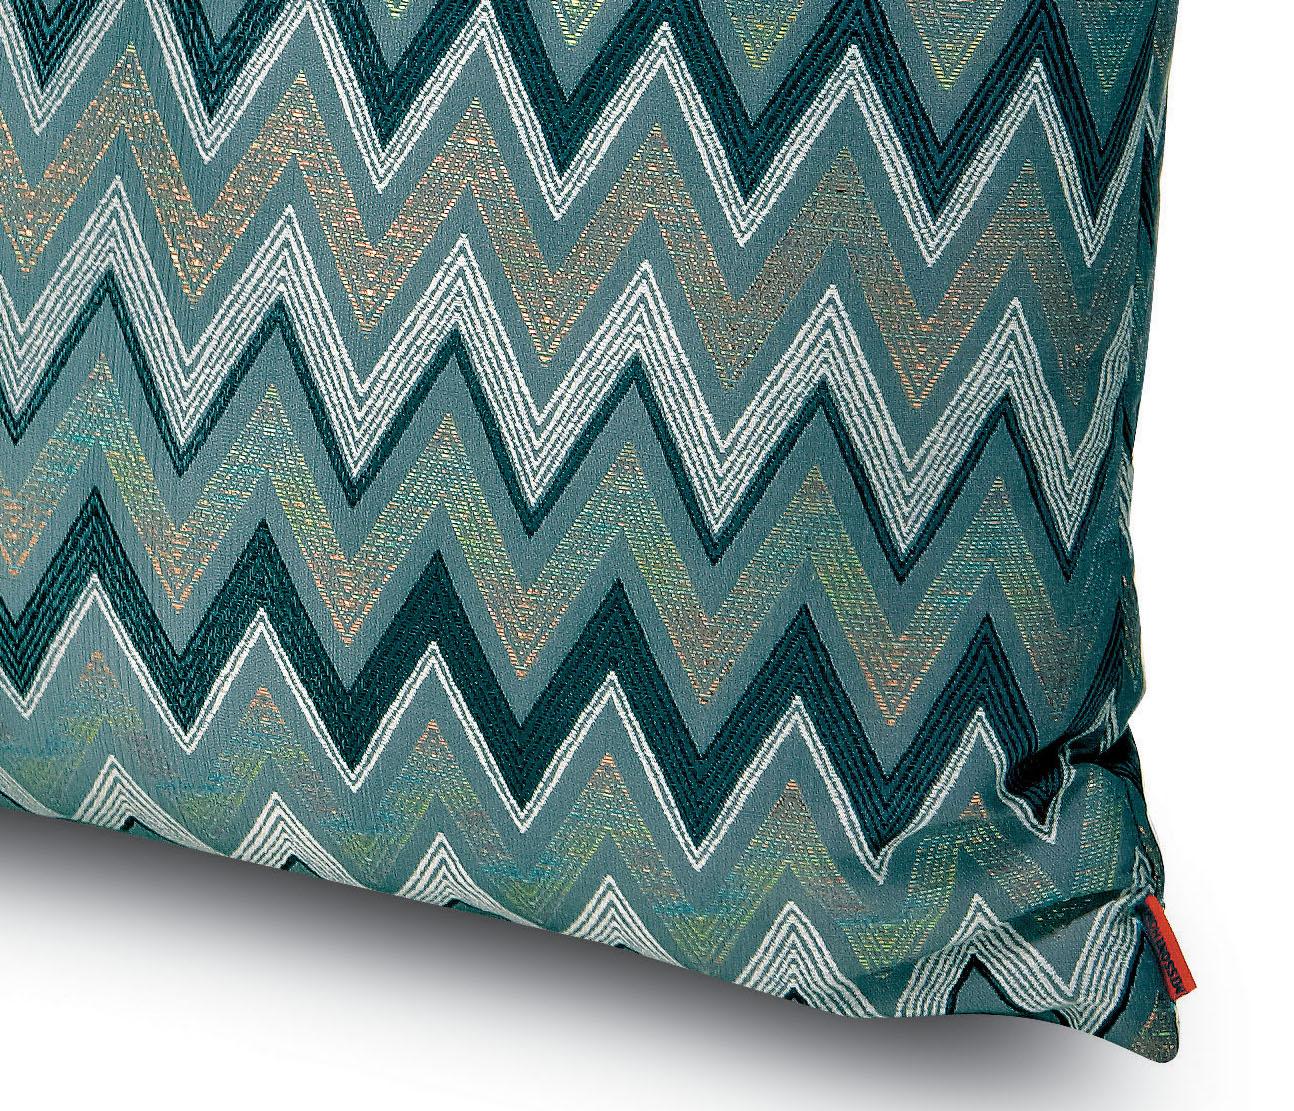 Cushion in shaded metallic chevron jacquard fabric. Dimensions: 16x16 inches. Packaged in disposable plastic. Perfect for adding an elegant touch to any bedroom or living room.

Composition: 48% Polyester, 33% Cotton, 14% Acetate, 5% Metal Fiber.